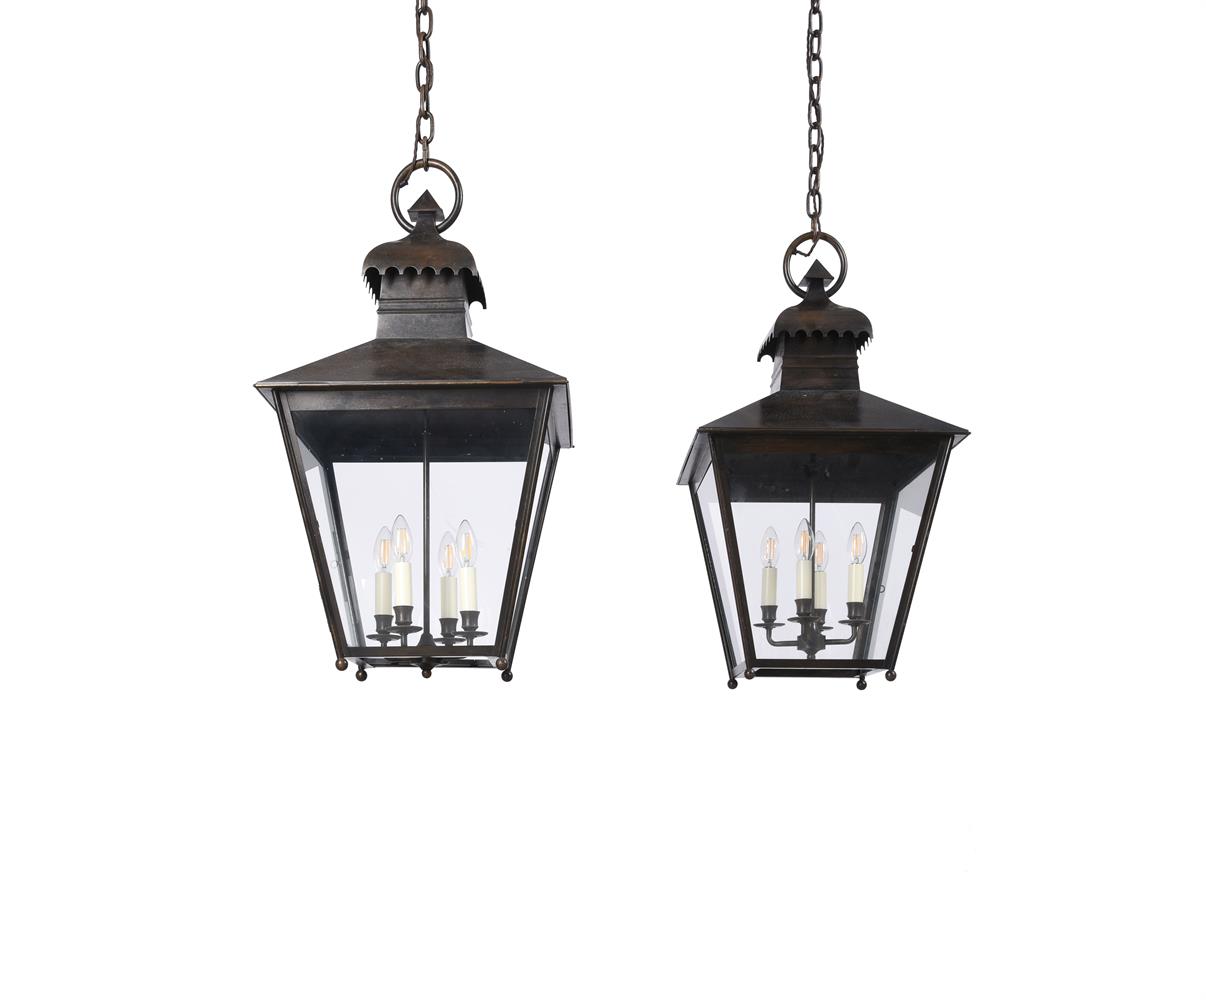 A PAIR OF PATINATED METAL CHARLES EDWARDS HALL LANTERNS IN 19TH CENTURY TASTE